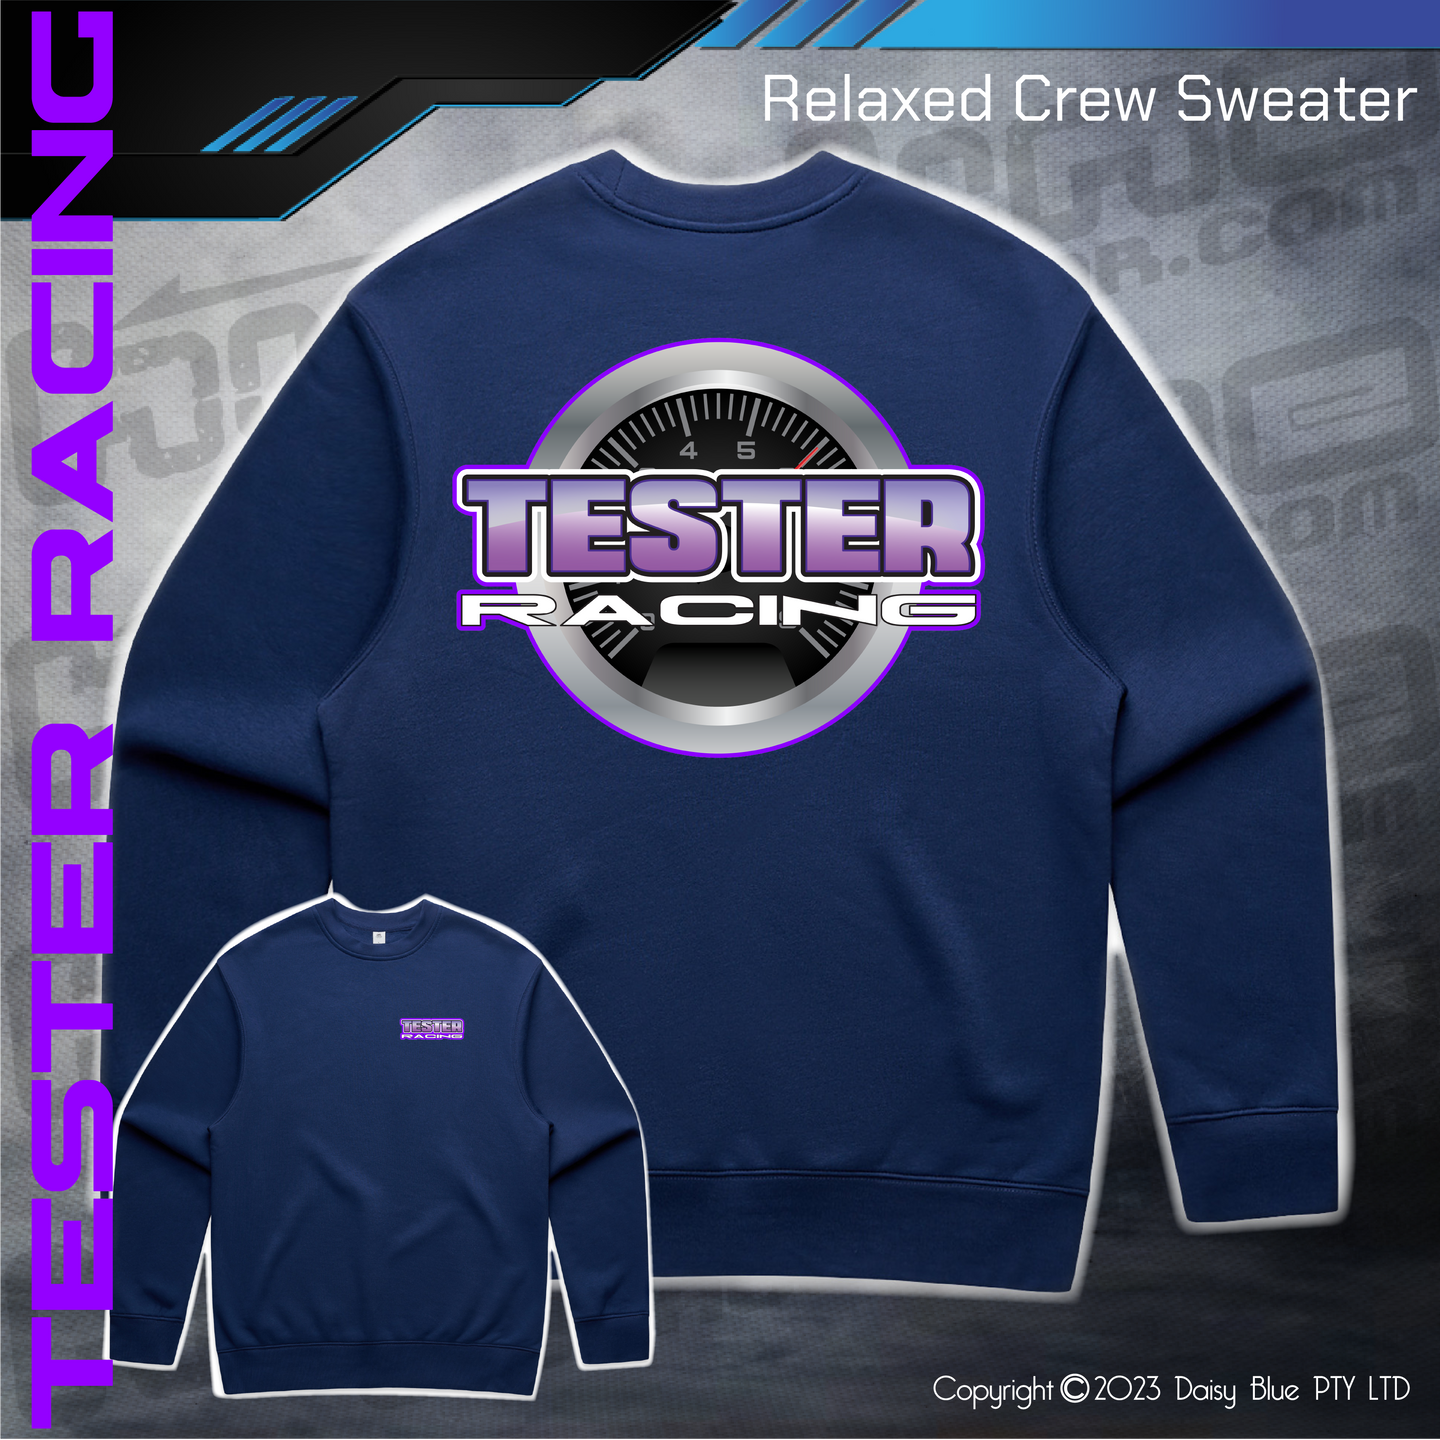 Relaxed Crew Sweater - Tester Racing